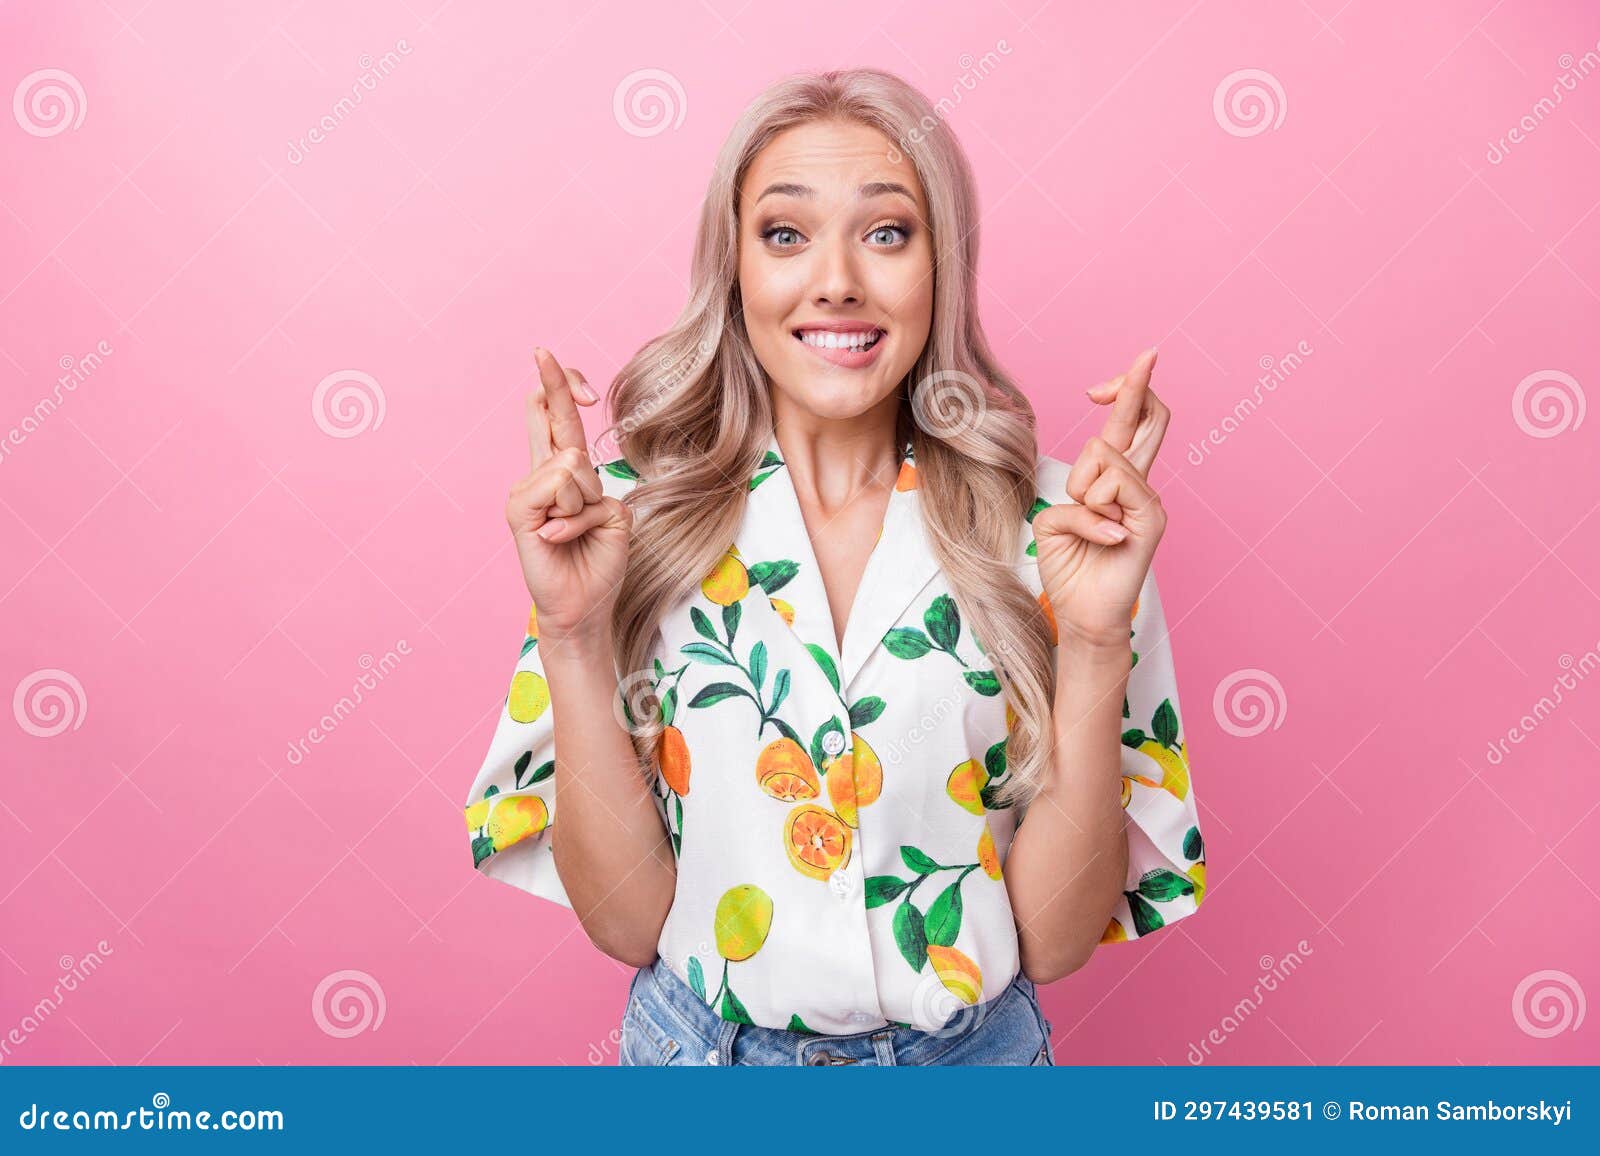 3. Wavy Blonde Hair Girl High Resolution Stock Photography and Images - Alamy - wide 9